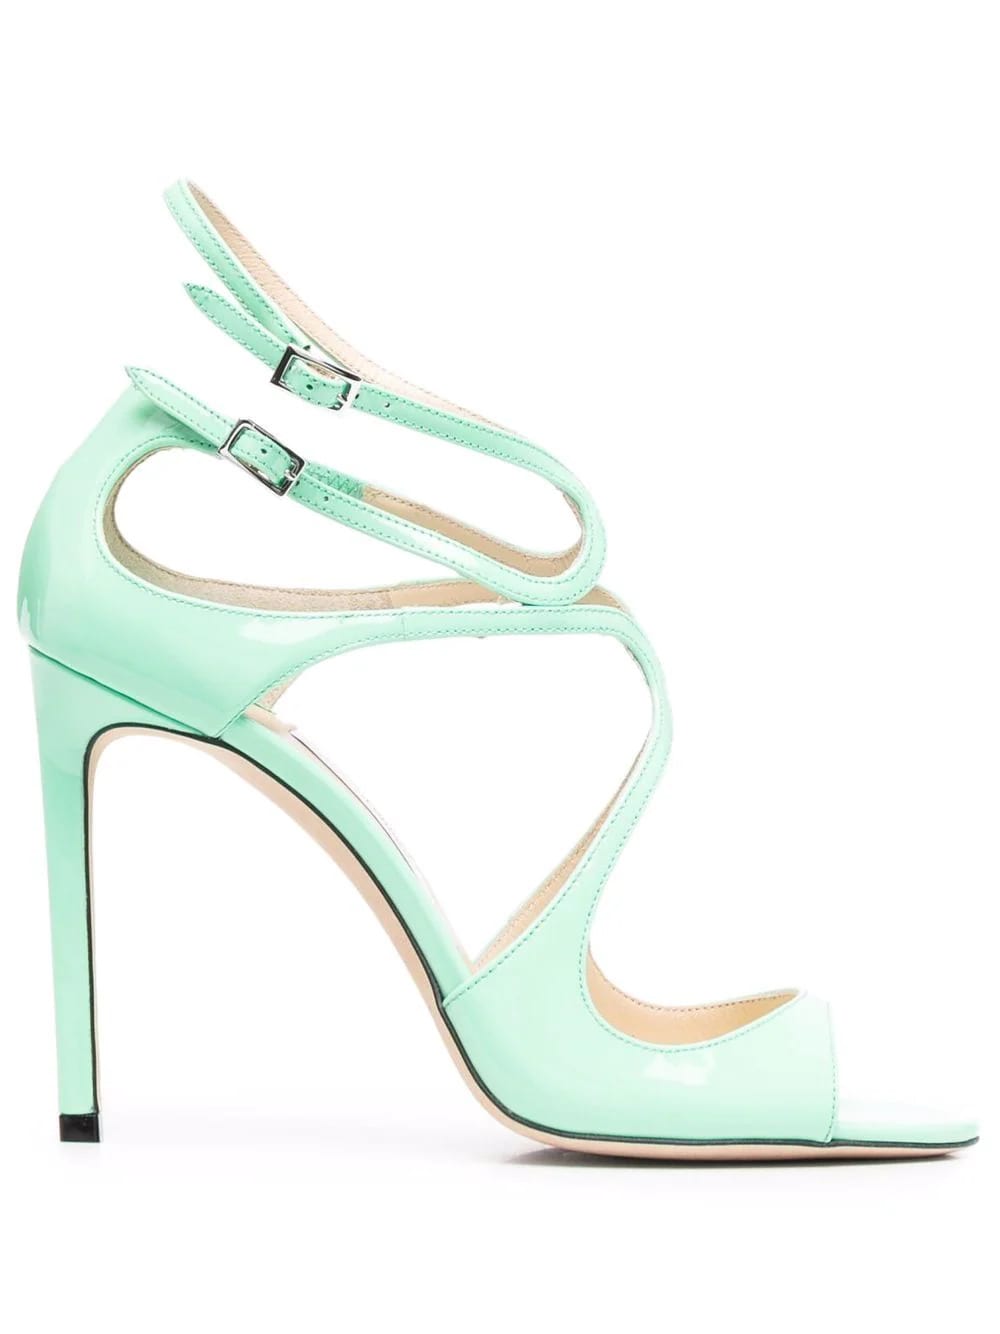 Jimmy Choo Lang 100 Sandal In Mint Green Patent Leather